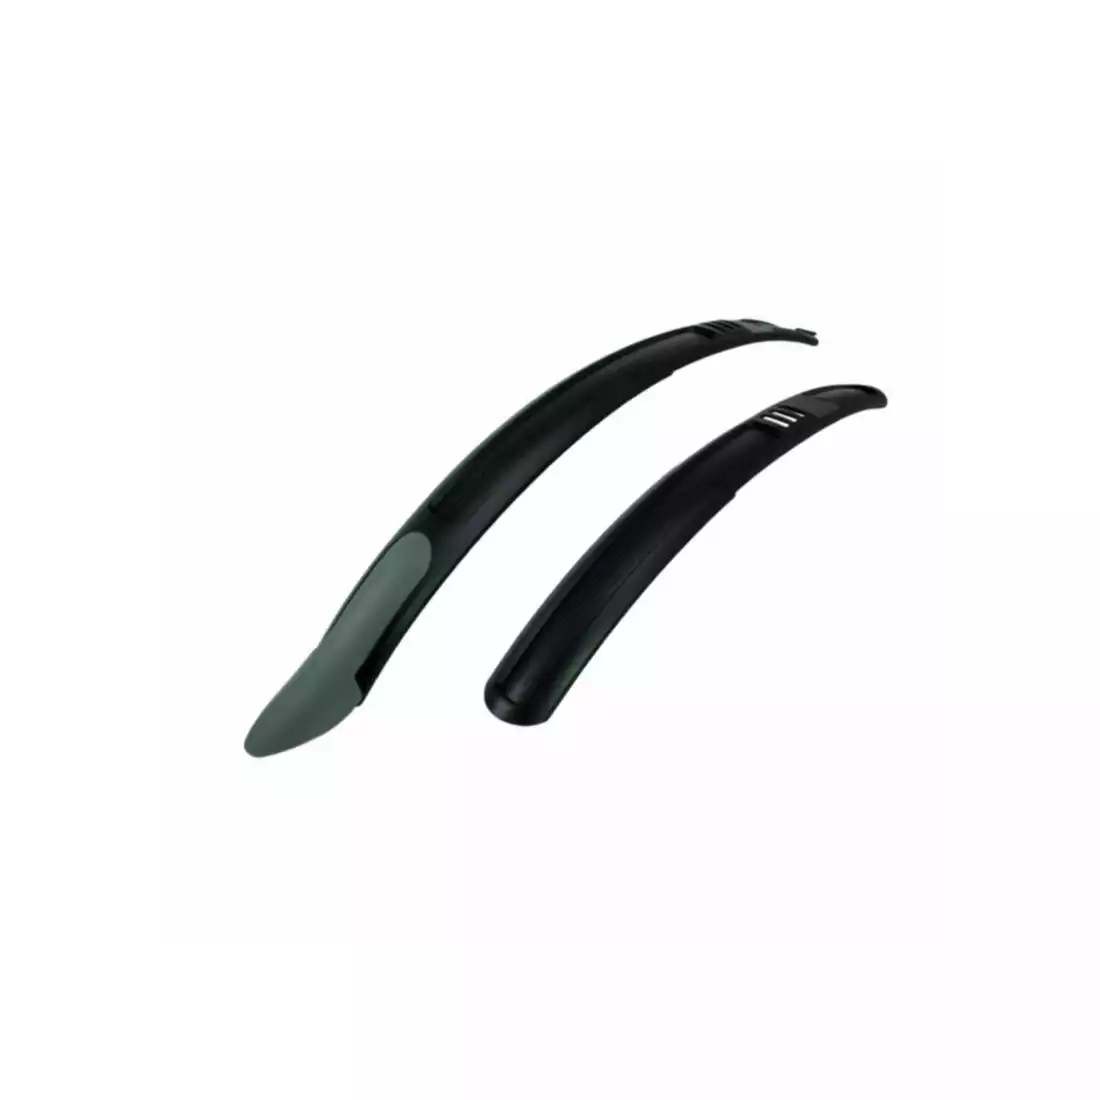 Set of bicycle fenders 27,5-29'' black and gray